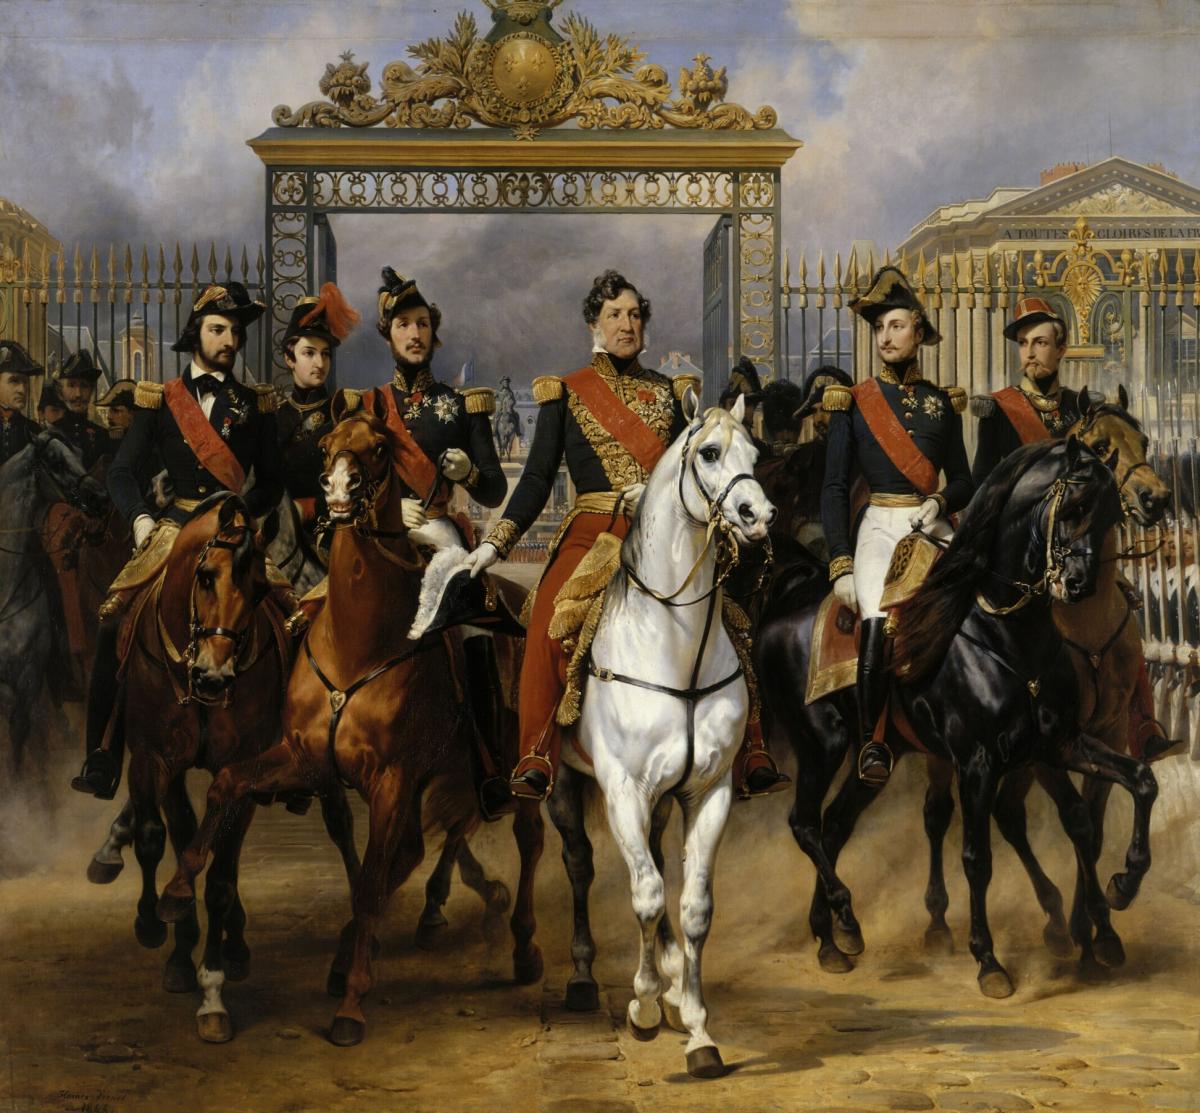 Louis-Philippe I, King of the French